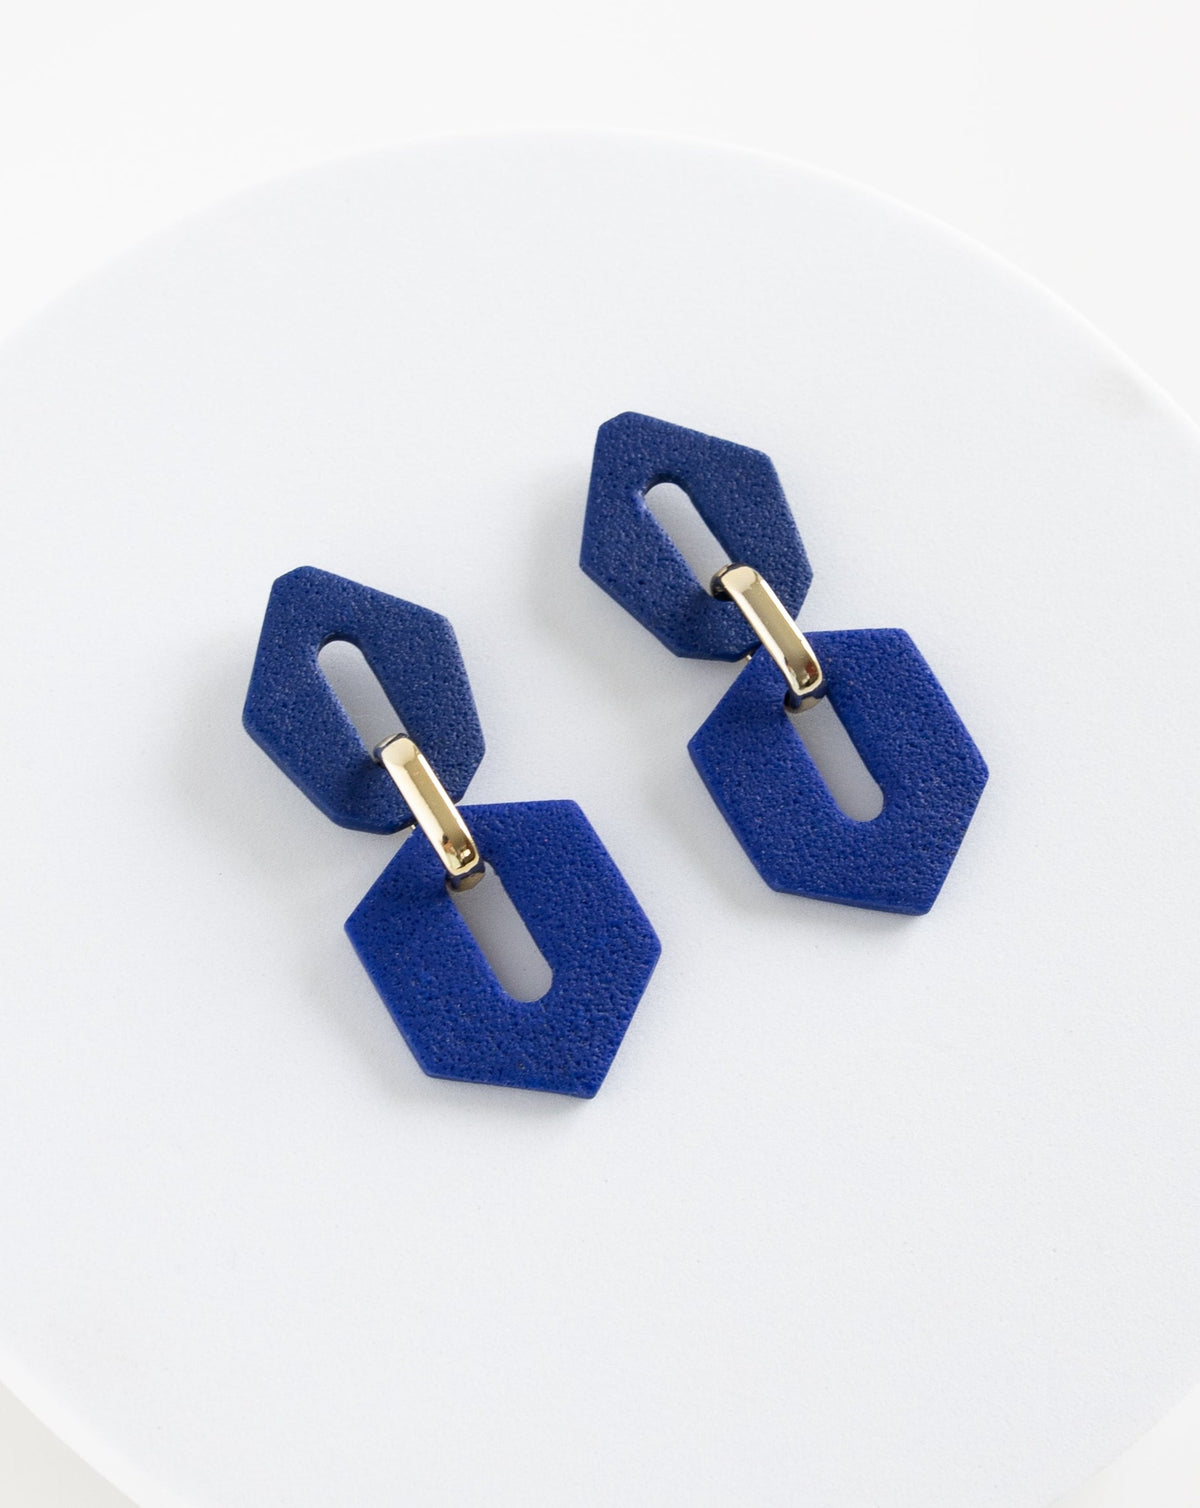 LYHO exclusive design, Shilla earrings in Hue Blue color, angled view.